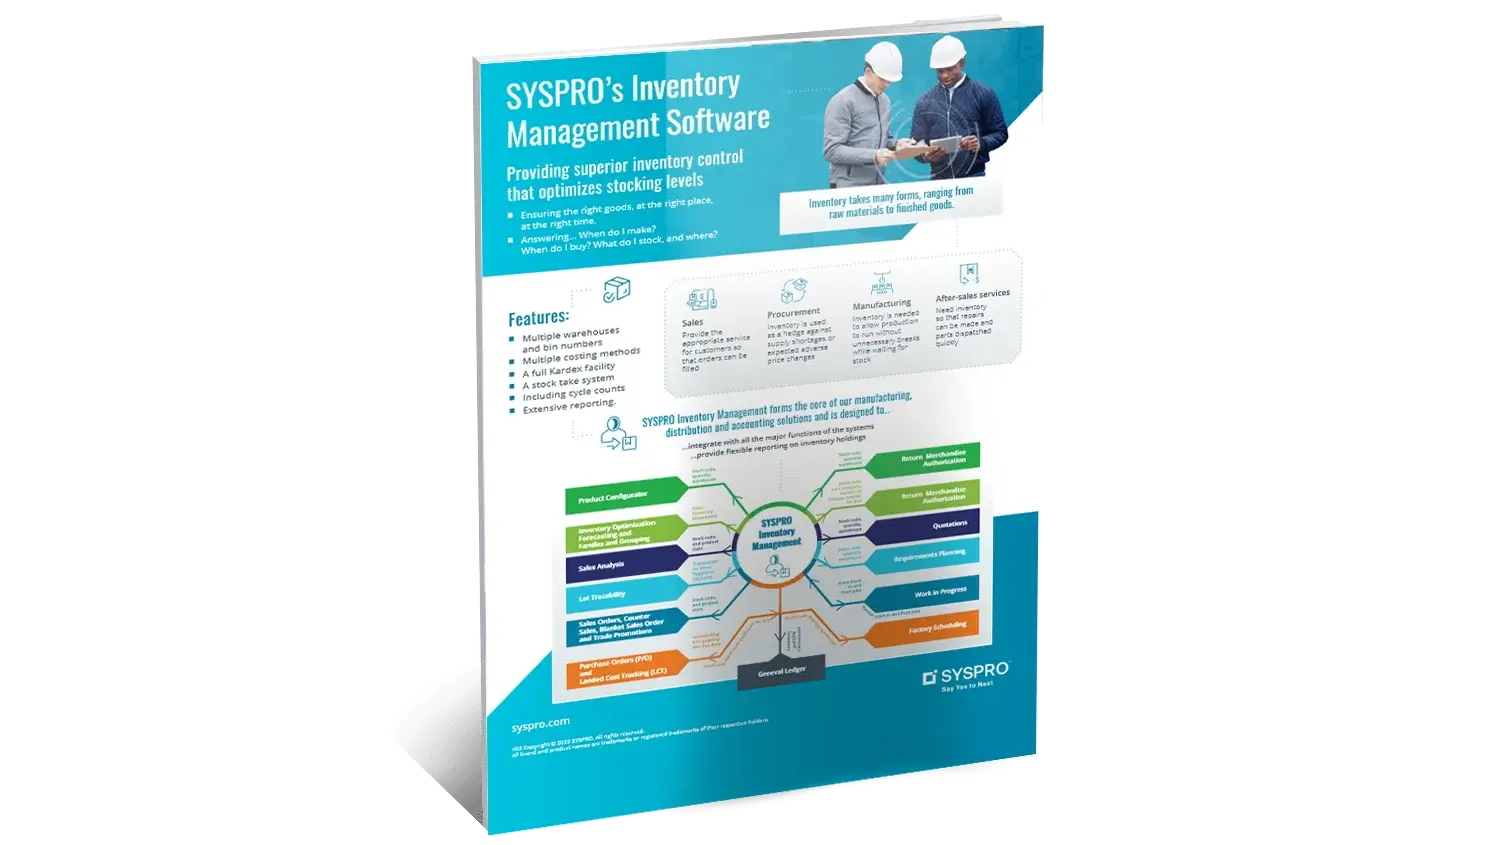 SYSPRO-ERP-software-system-inventory-management-infographic